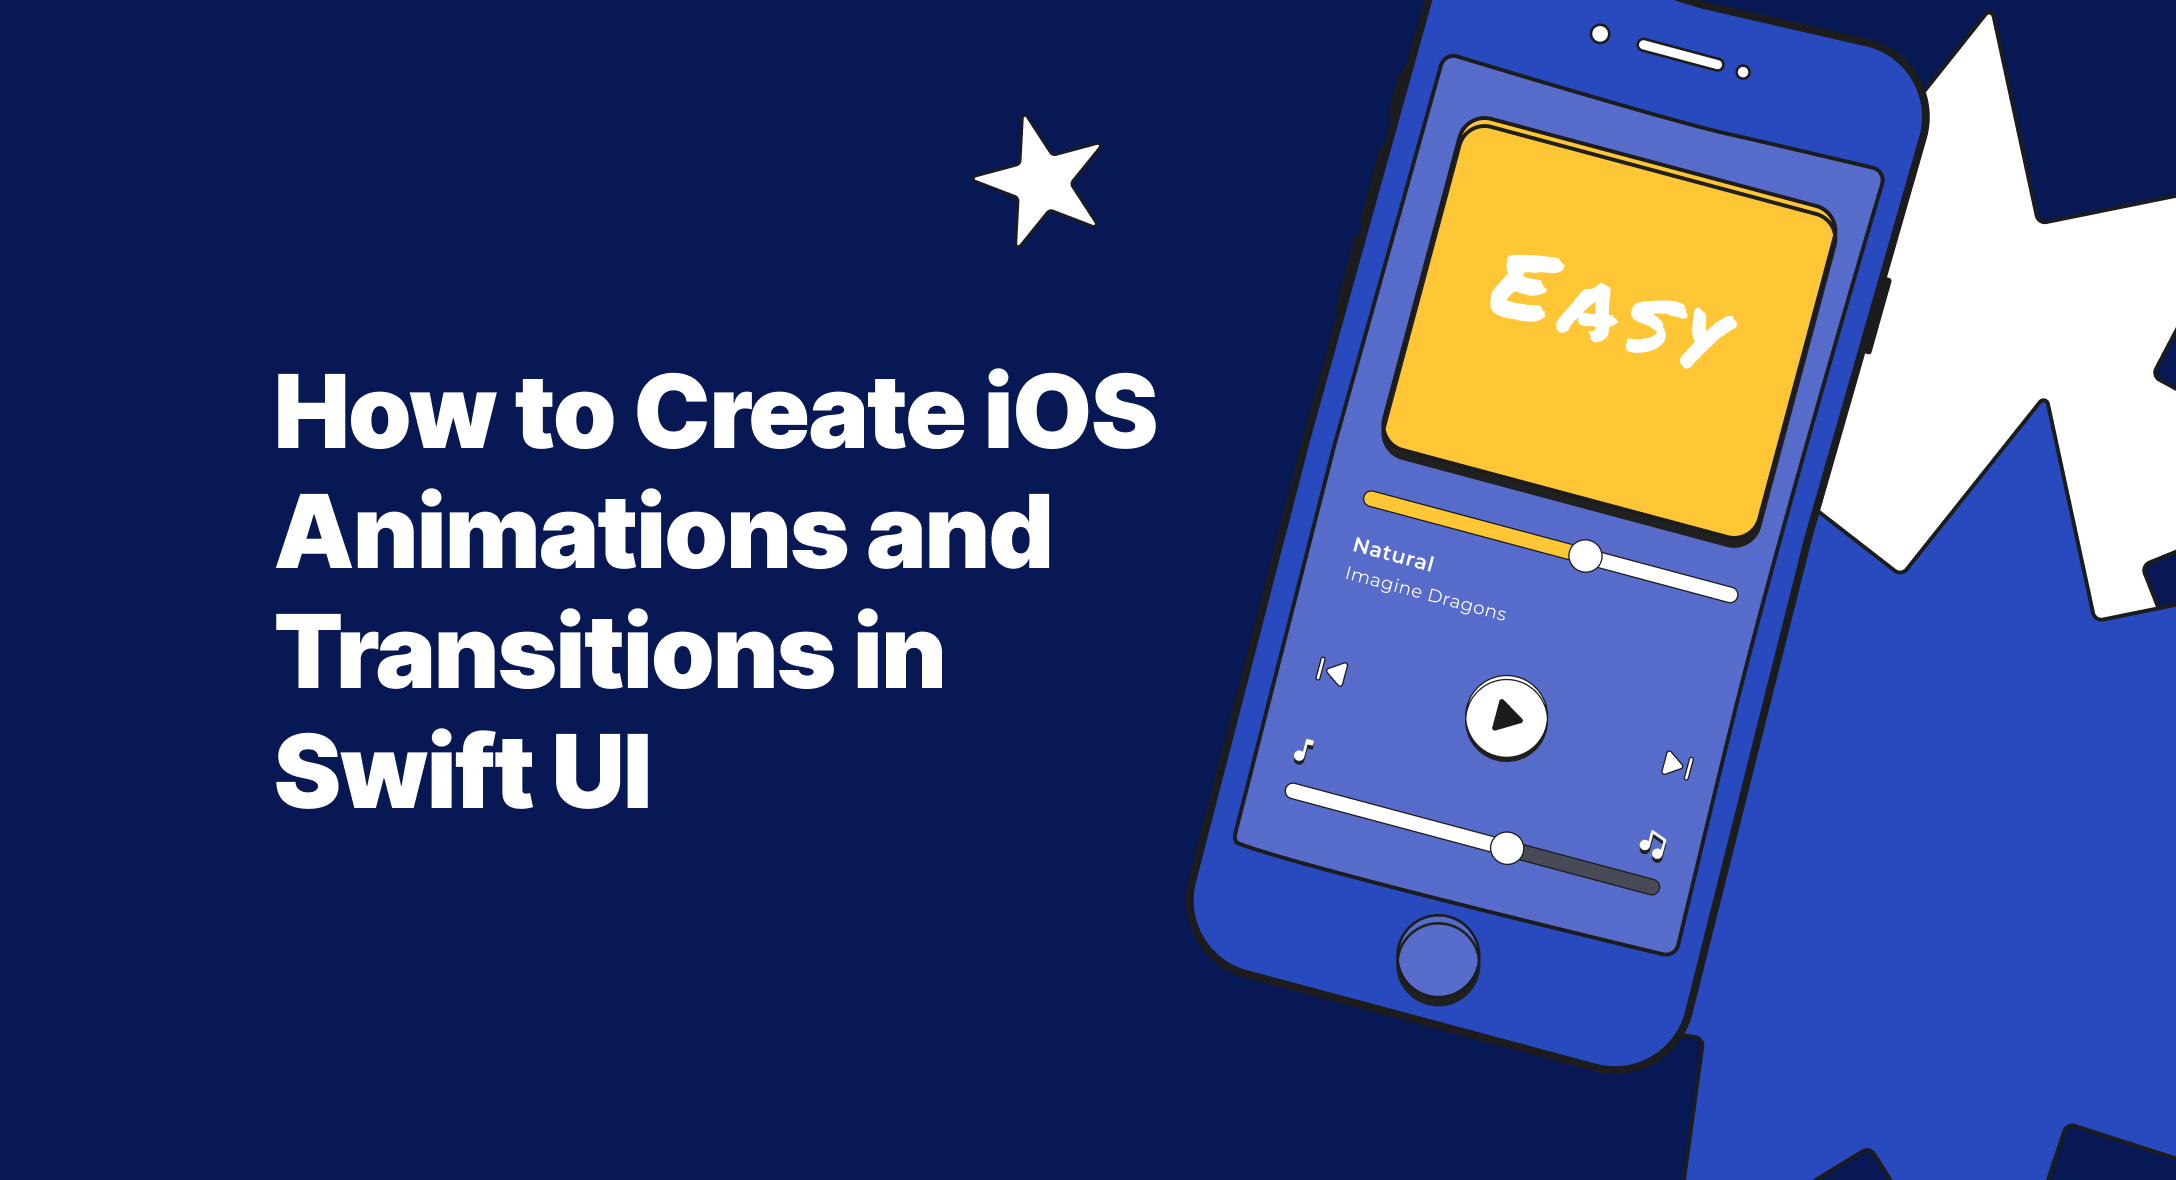 How to Create iOS Animations and Transitions in Swift UI